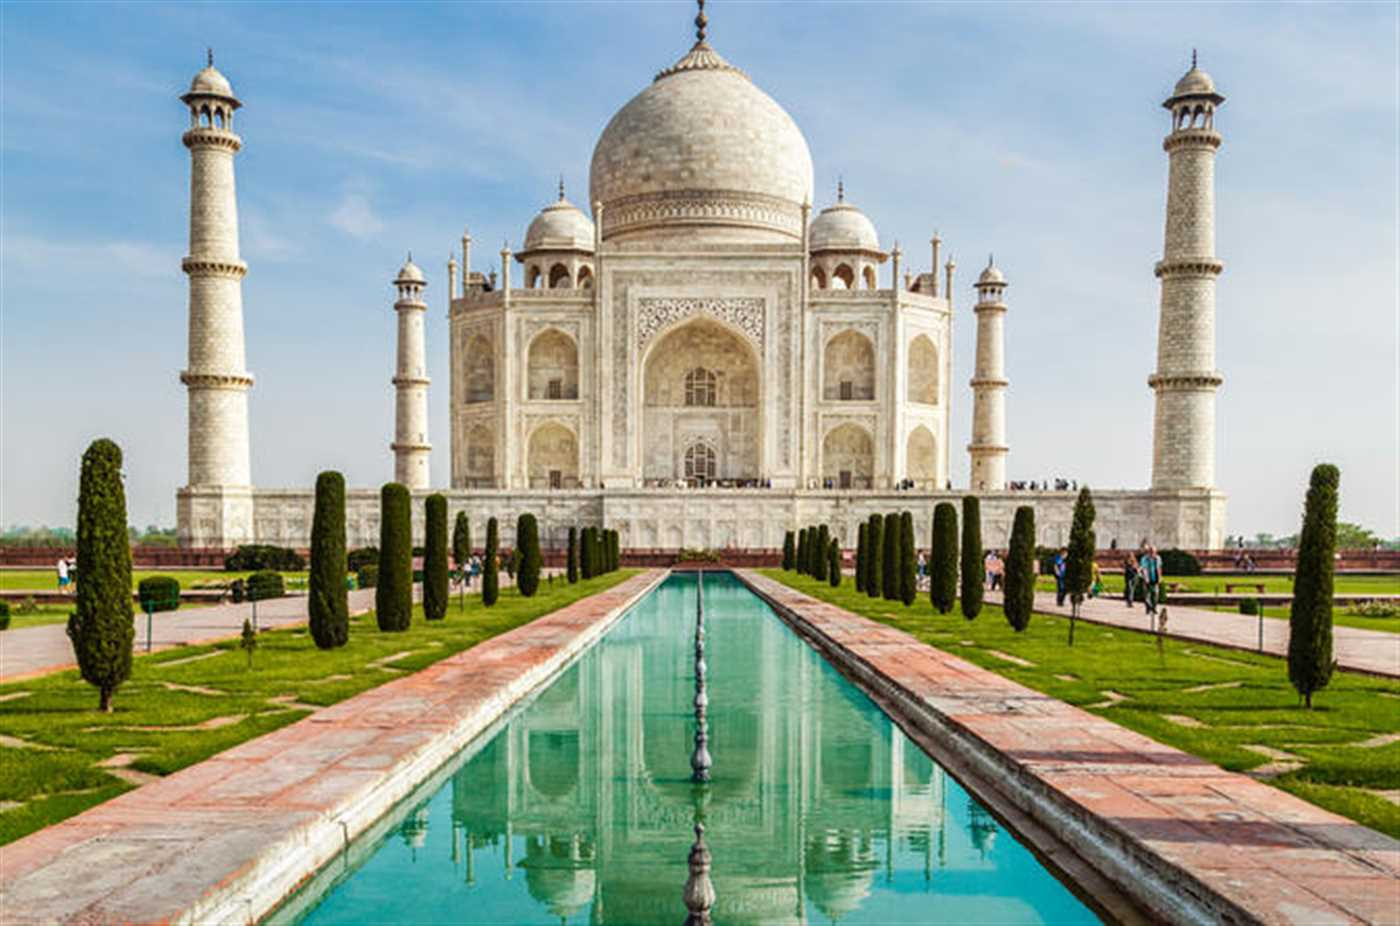 Private Taj Mahal Agra Overnight Tour from Delhi by Agra Trip with 2